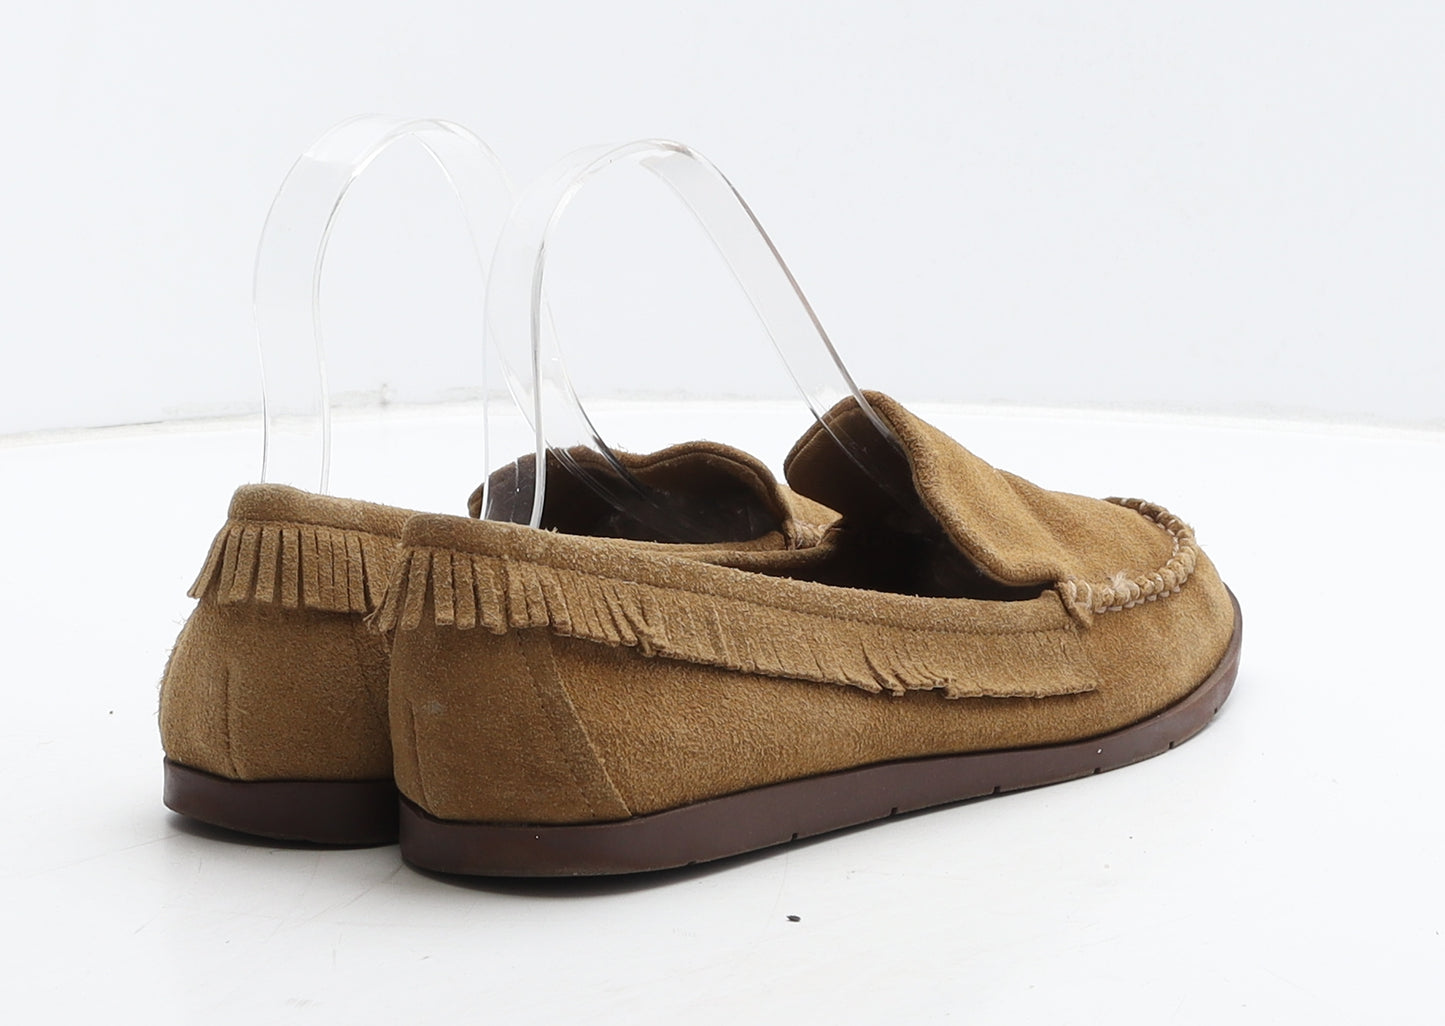 NEXT Womens Brown Leather Moccasin Casual UK 5 38